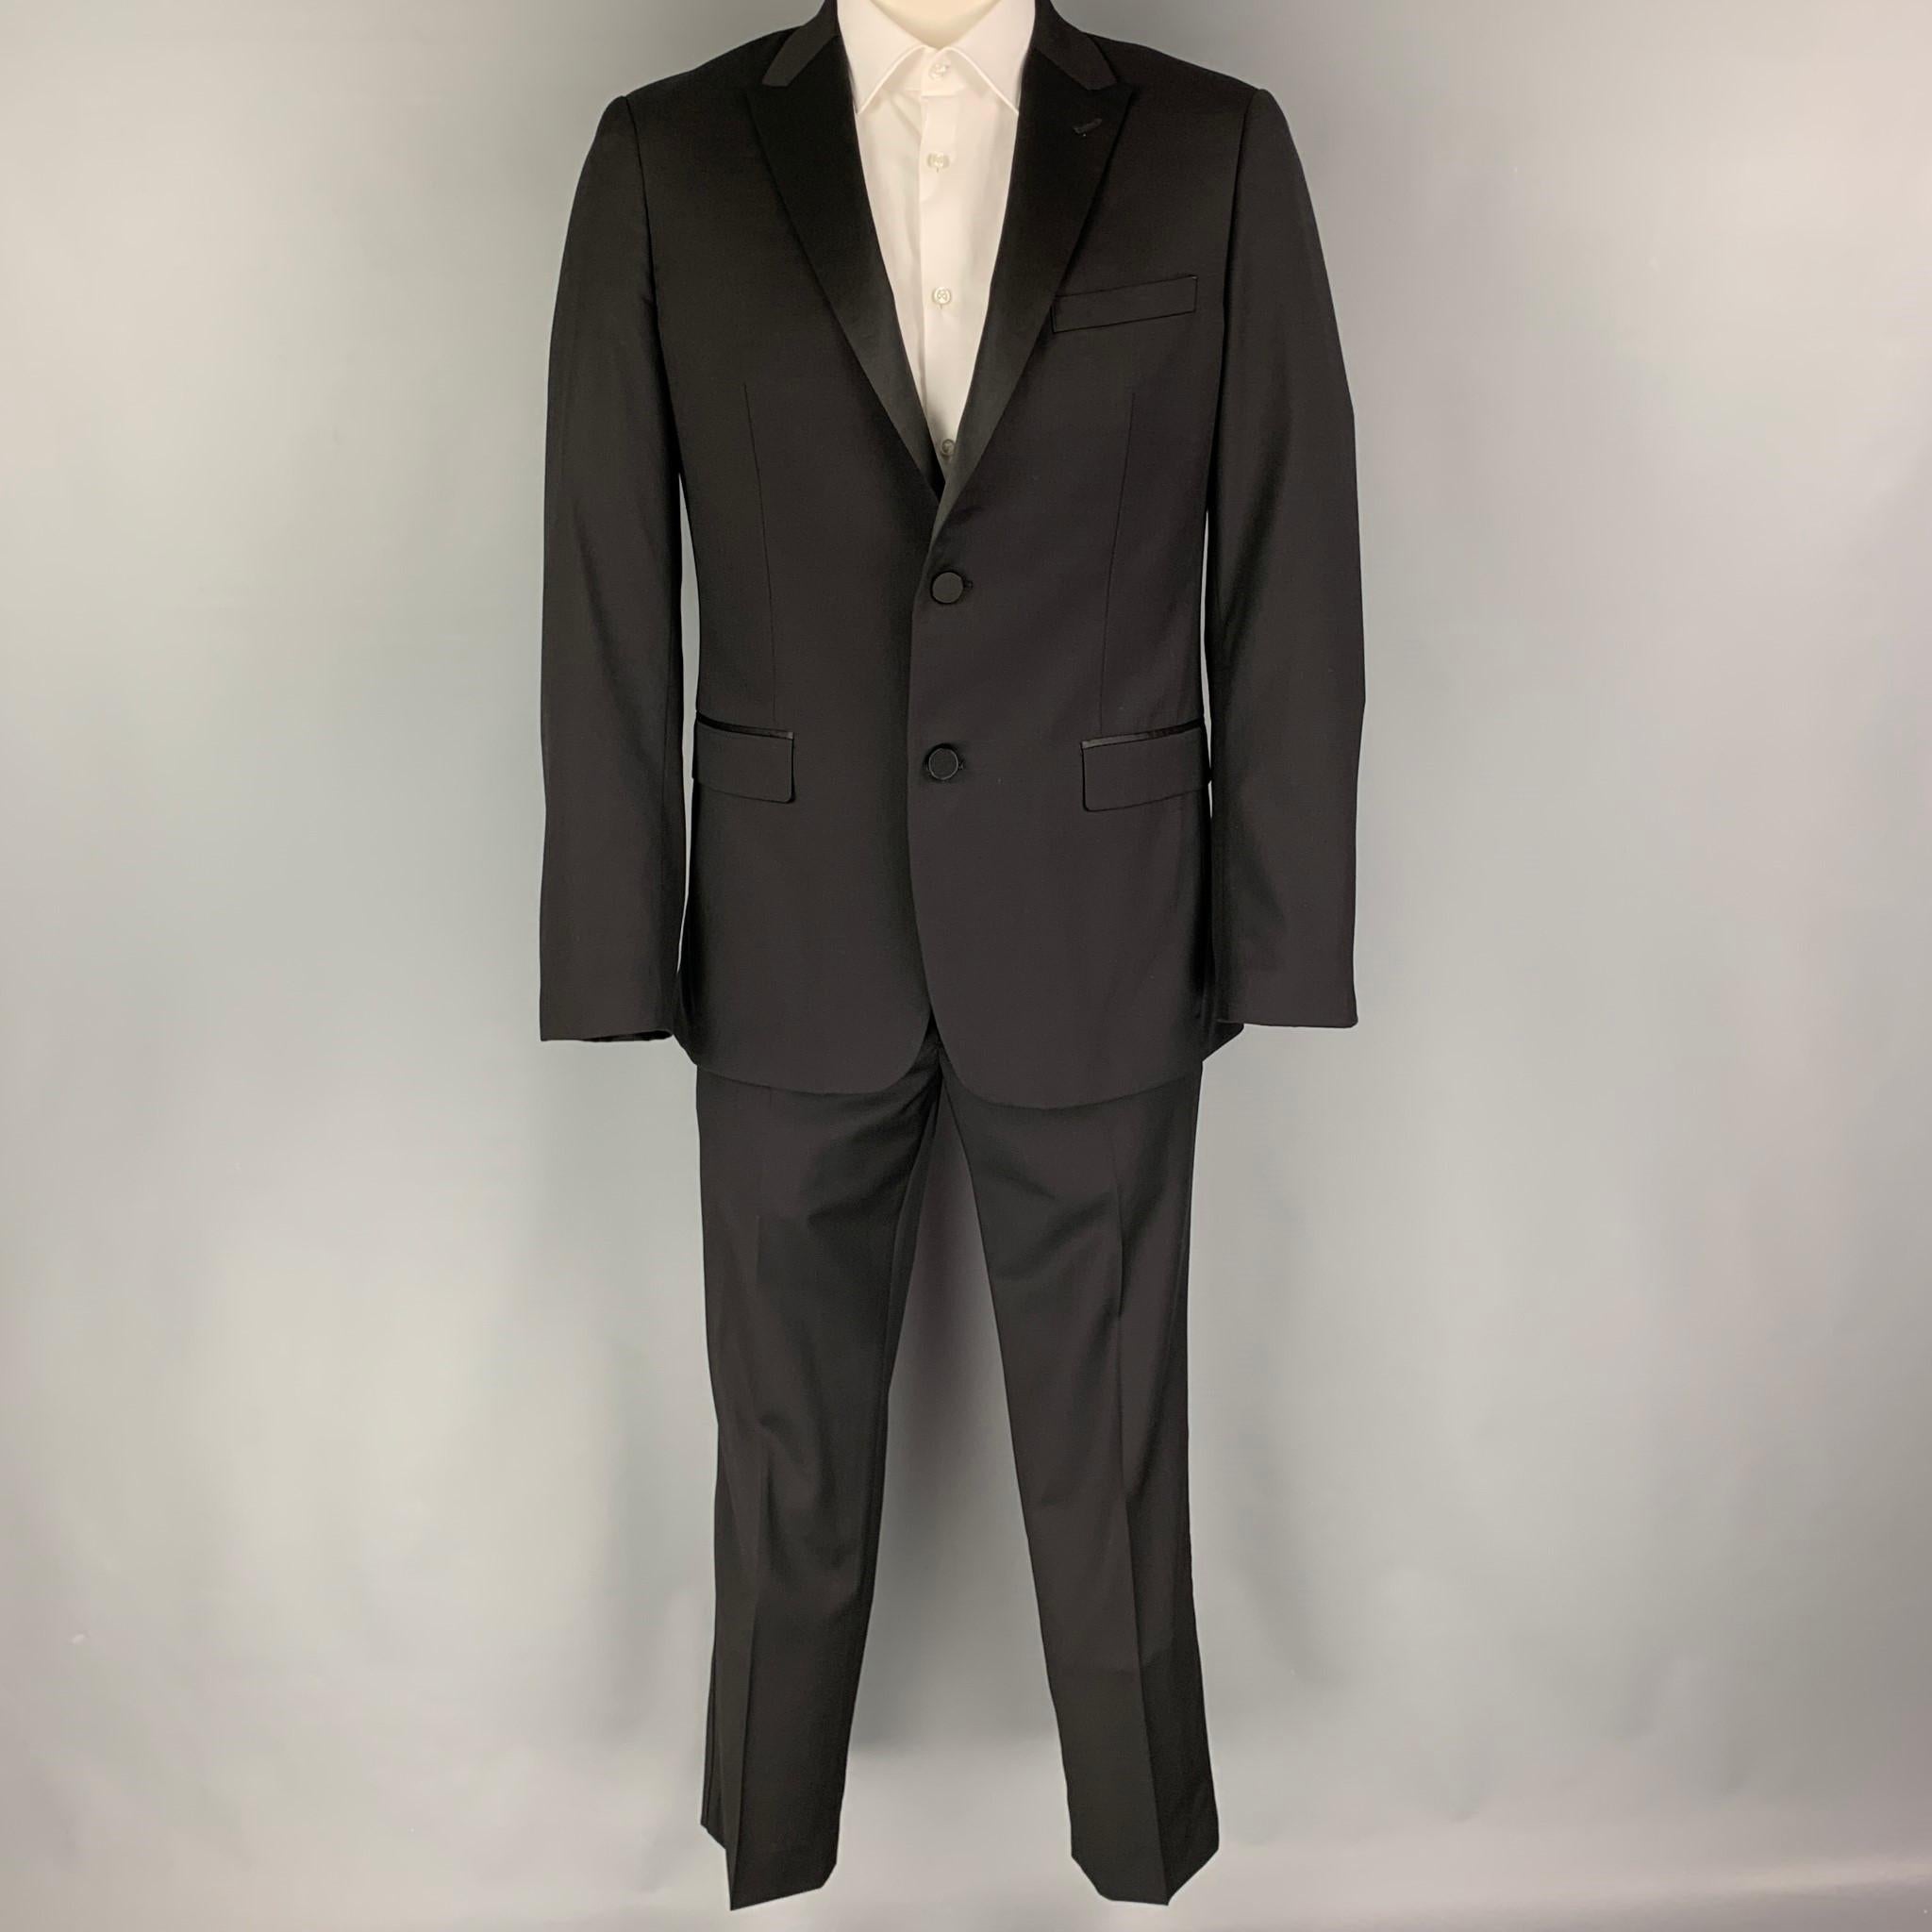 THEORY Tuxedo suit comes in a black wool with a full liner and includes a single breasted, double button sport coat with a peak lapel and matching flat front trousers.

Excellent Pre-Owned Condition.
Marked: 42 R

Measurements:

-Jacket
Shoulder: 18